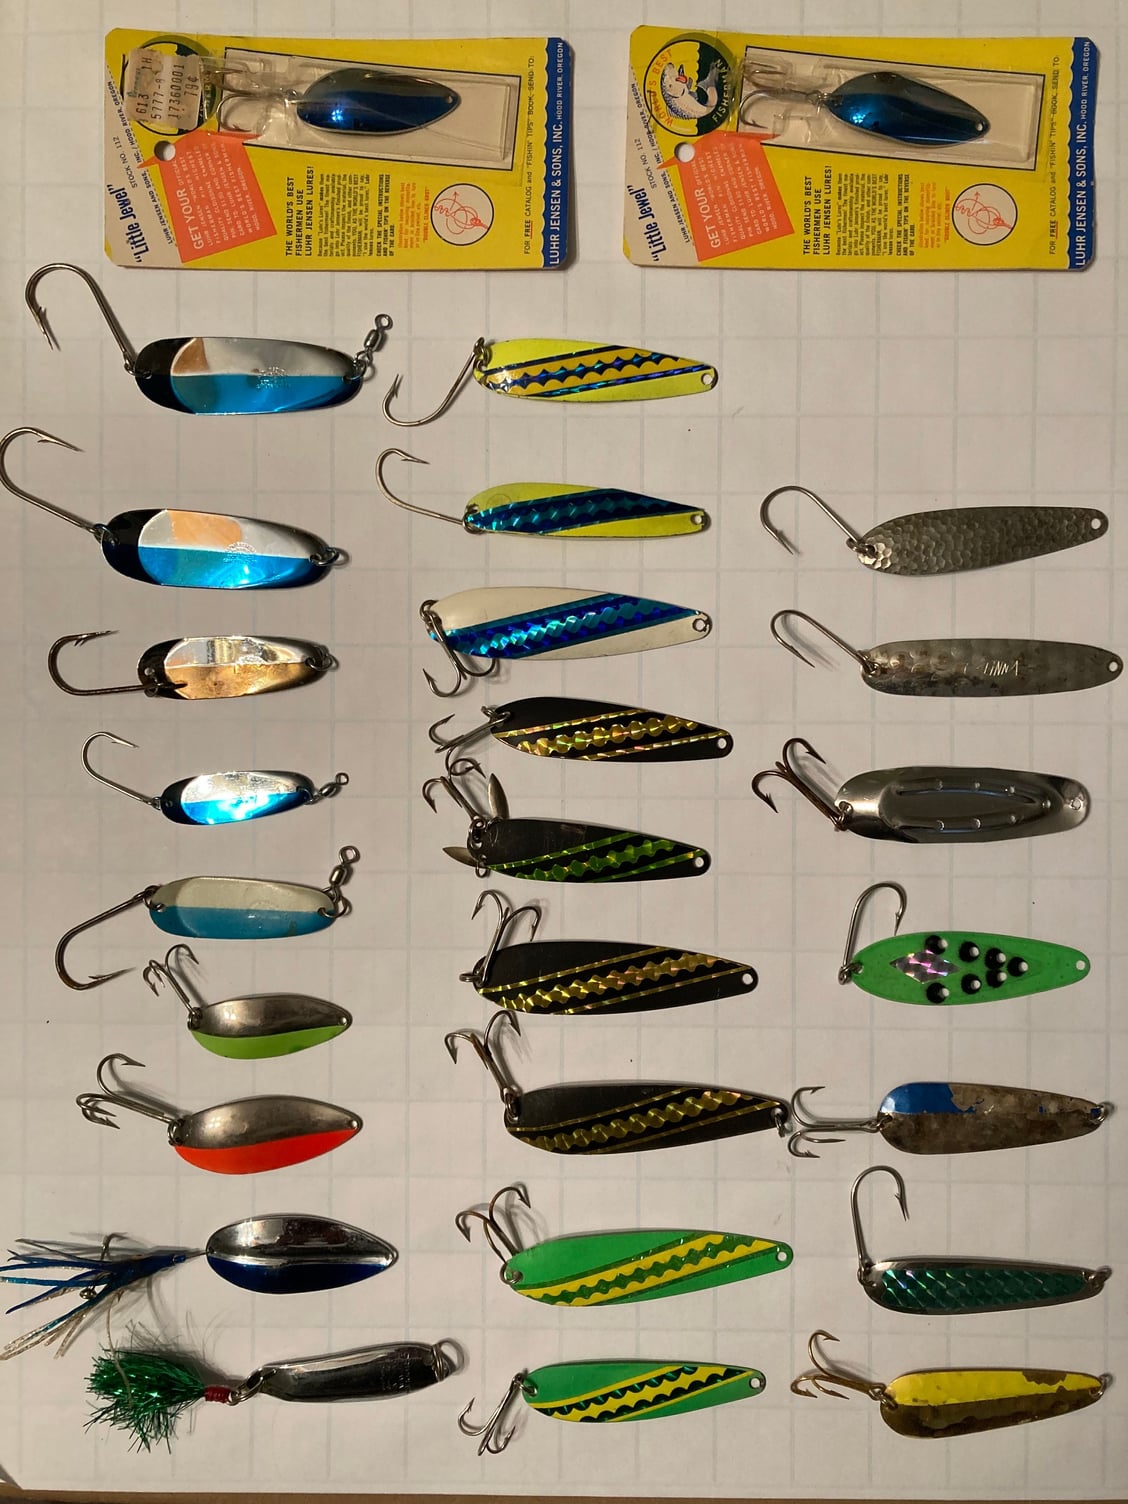 FS lure lots, lure Jensen, heddon, mirror lure, helin's, daredevil, np  nailer & more - The Hull Truth - Boating and Fishing Forum